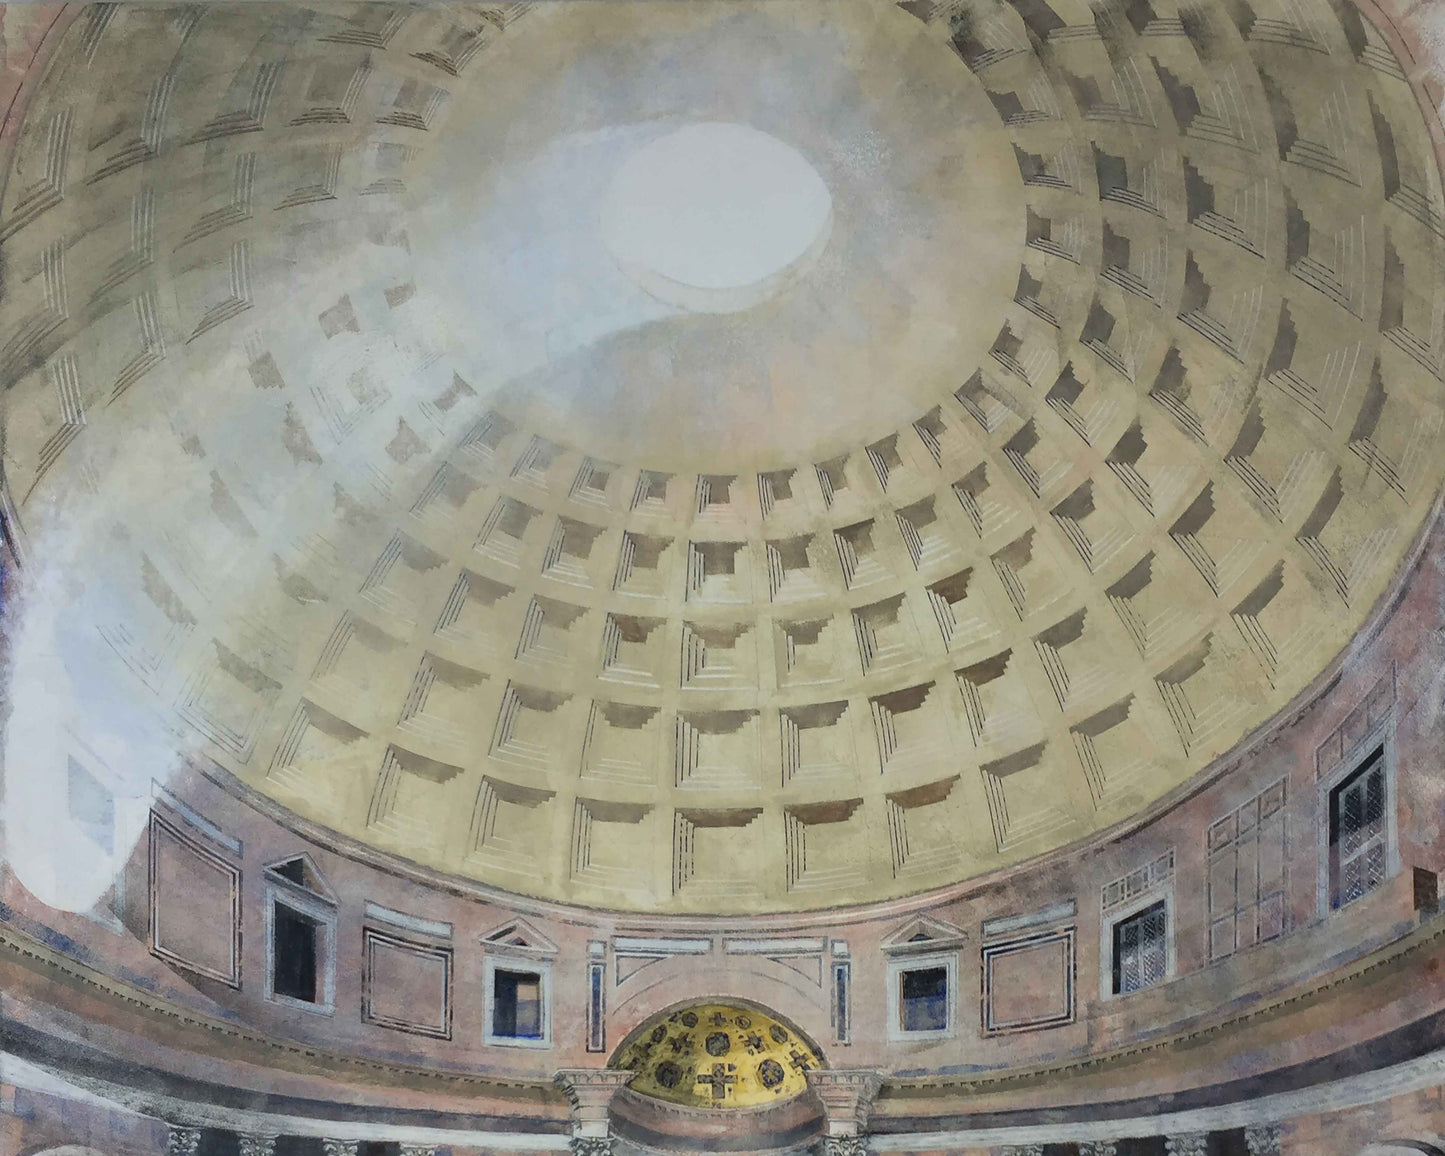 Wallpaper mural of the Interior dome of the Pantheon 300x240cm